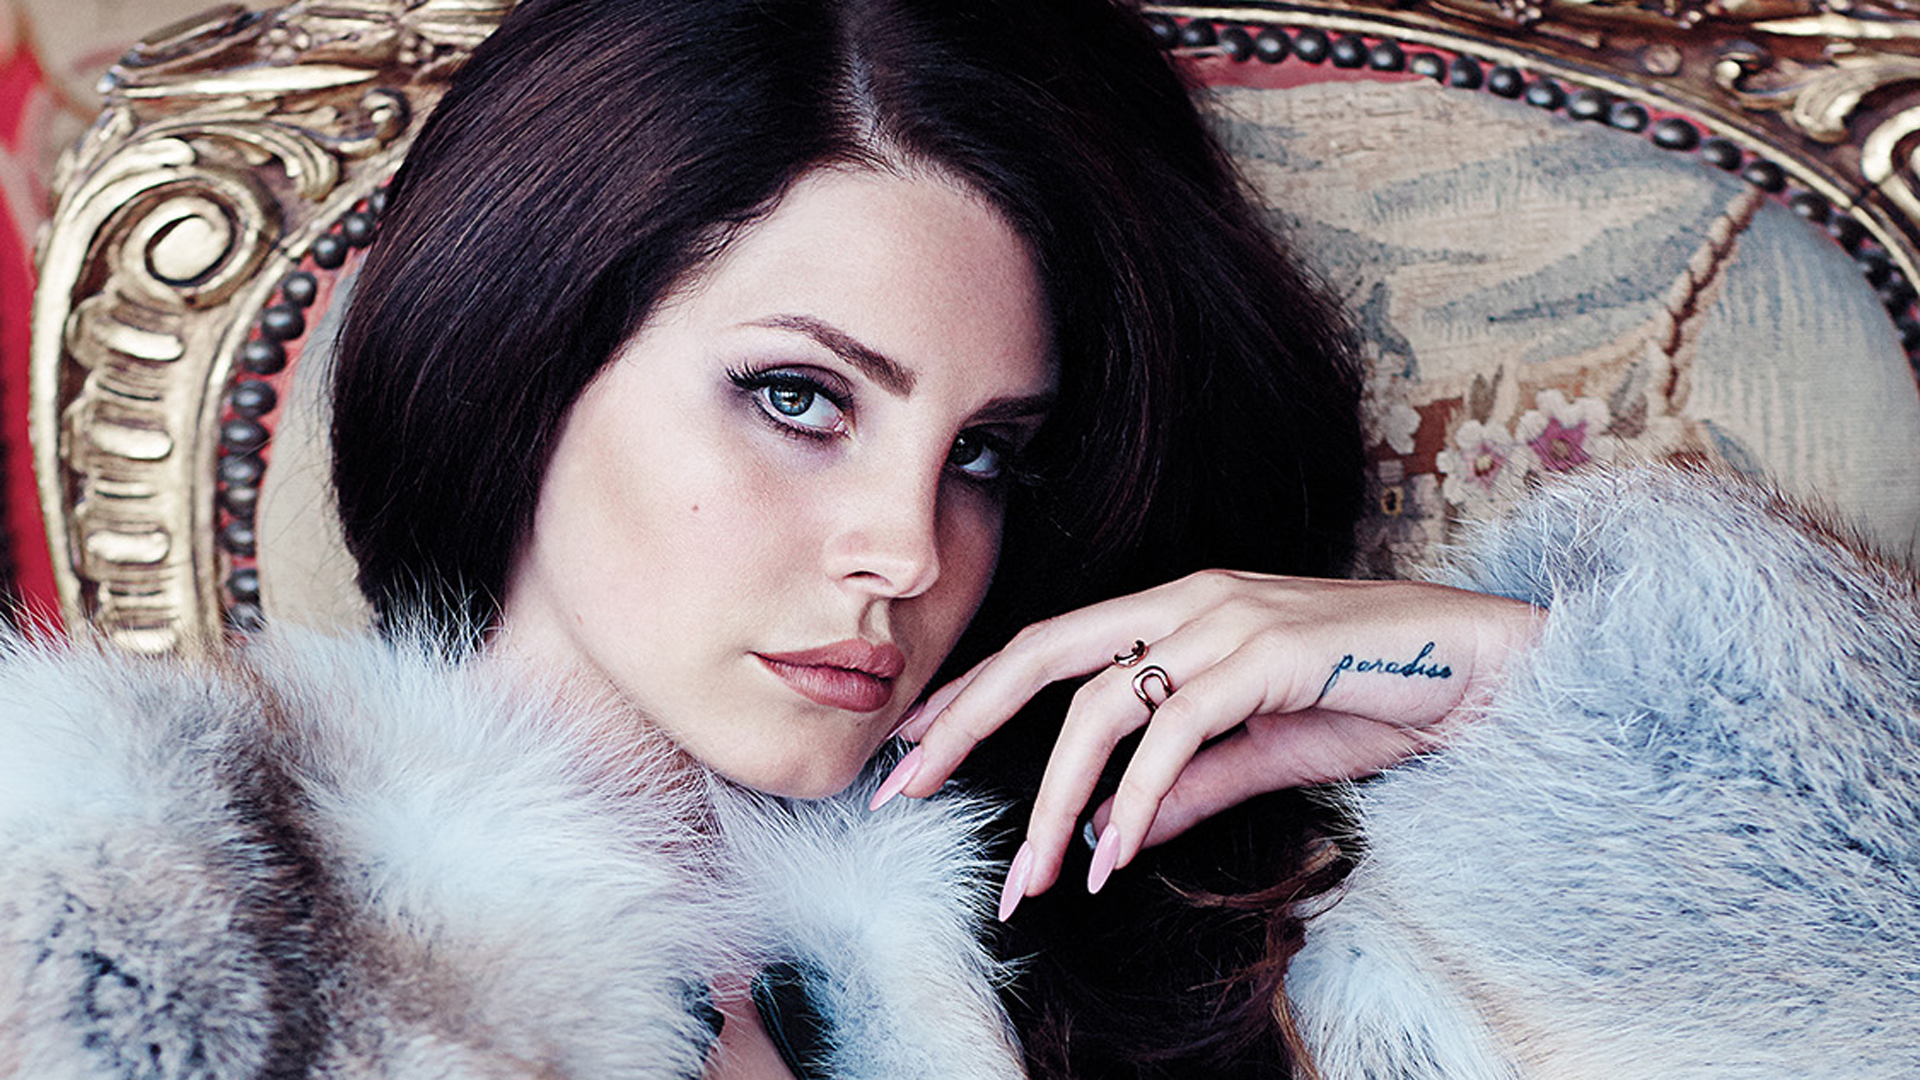 A woman with a fur coat and a tattoo on her hand. - Lana Del Rey